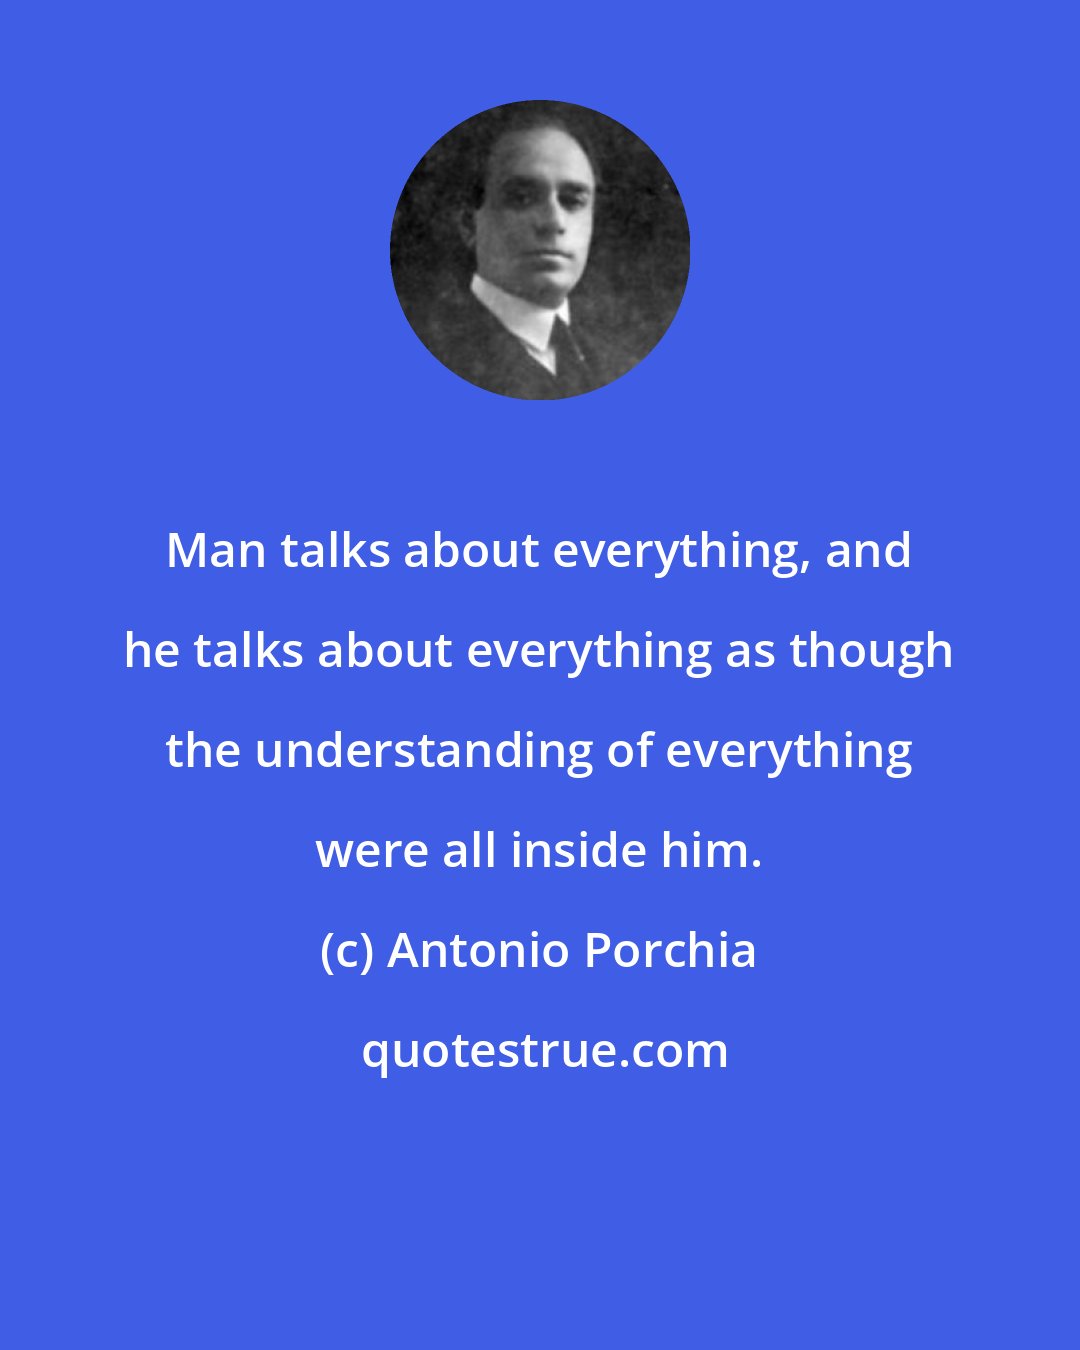 Antonio Porchia: Man talks about everything, and he talks about everything as though the understanding of everything were all inside him.